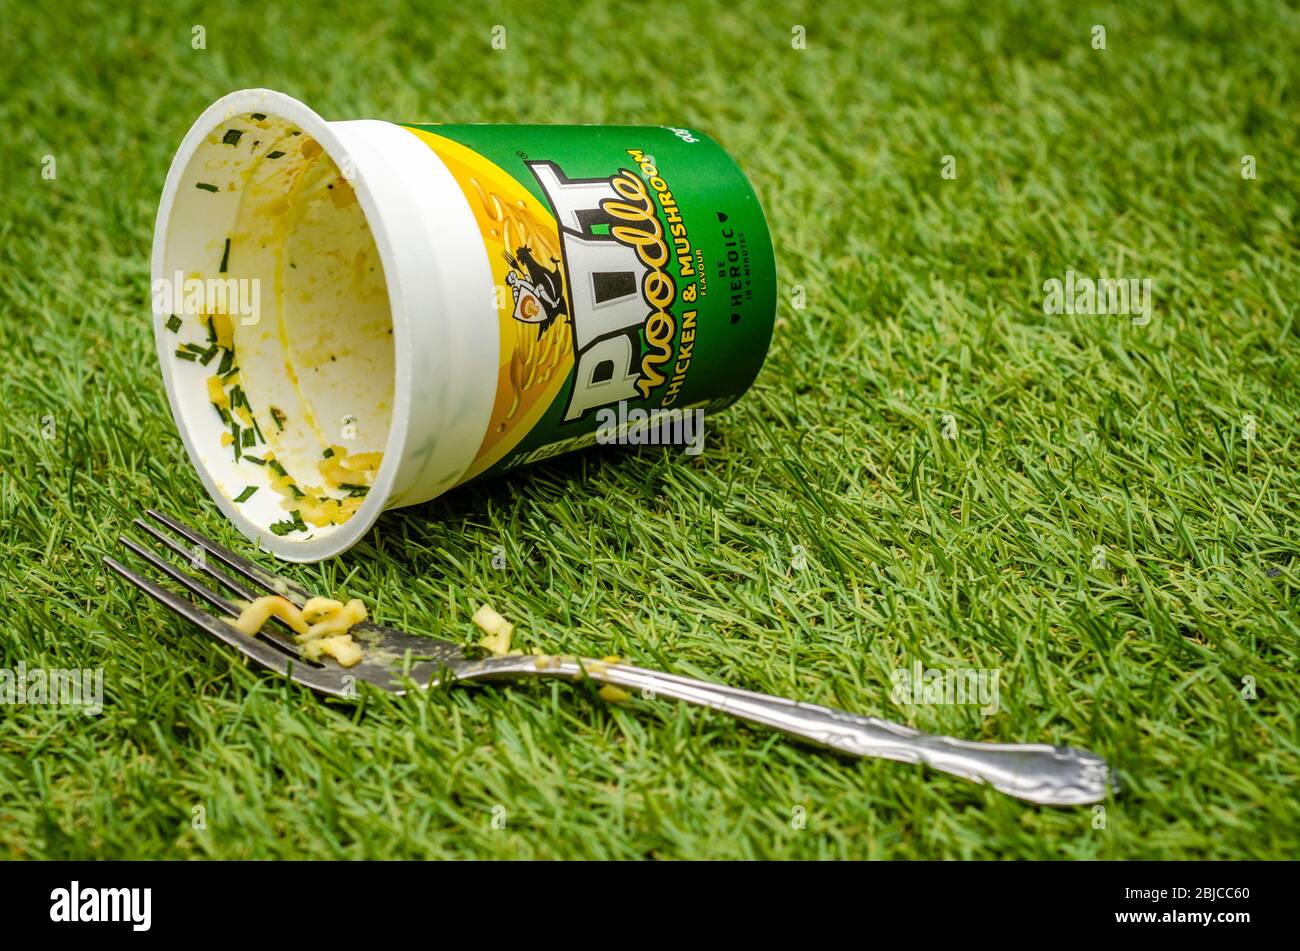 Empty and Discarded Pot Noodle Chicken and Mushroom Flavour Snack Pot, Isolated on a white background. Pot Noodle is made by Unilever Stock Photo